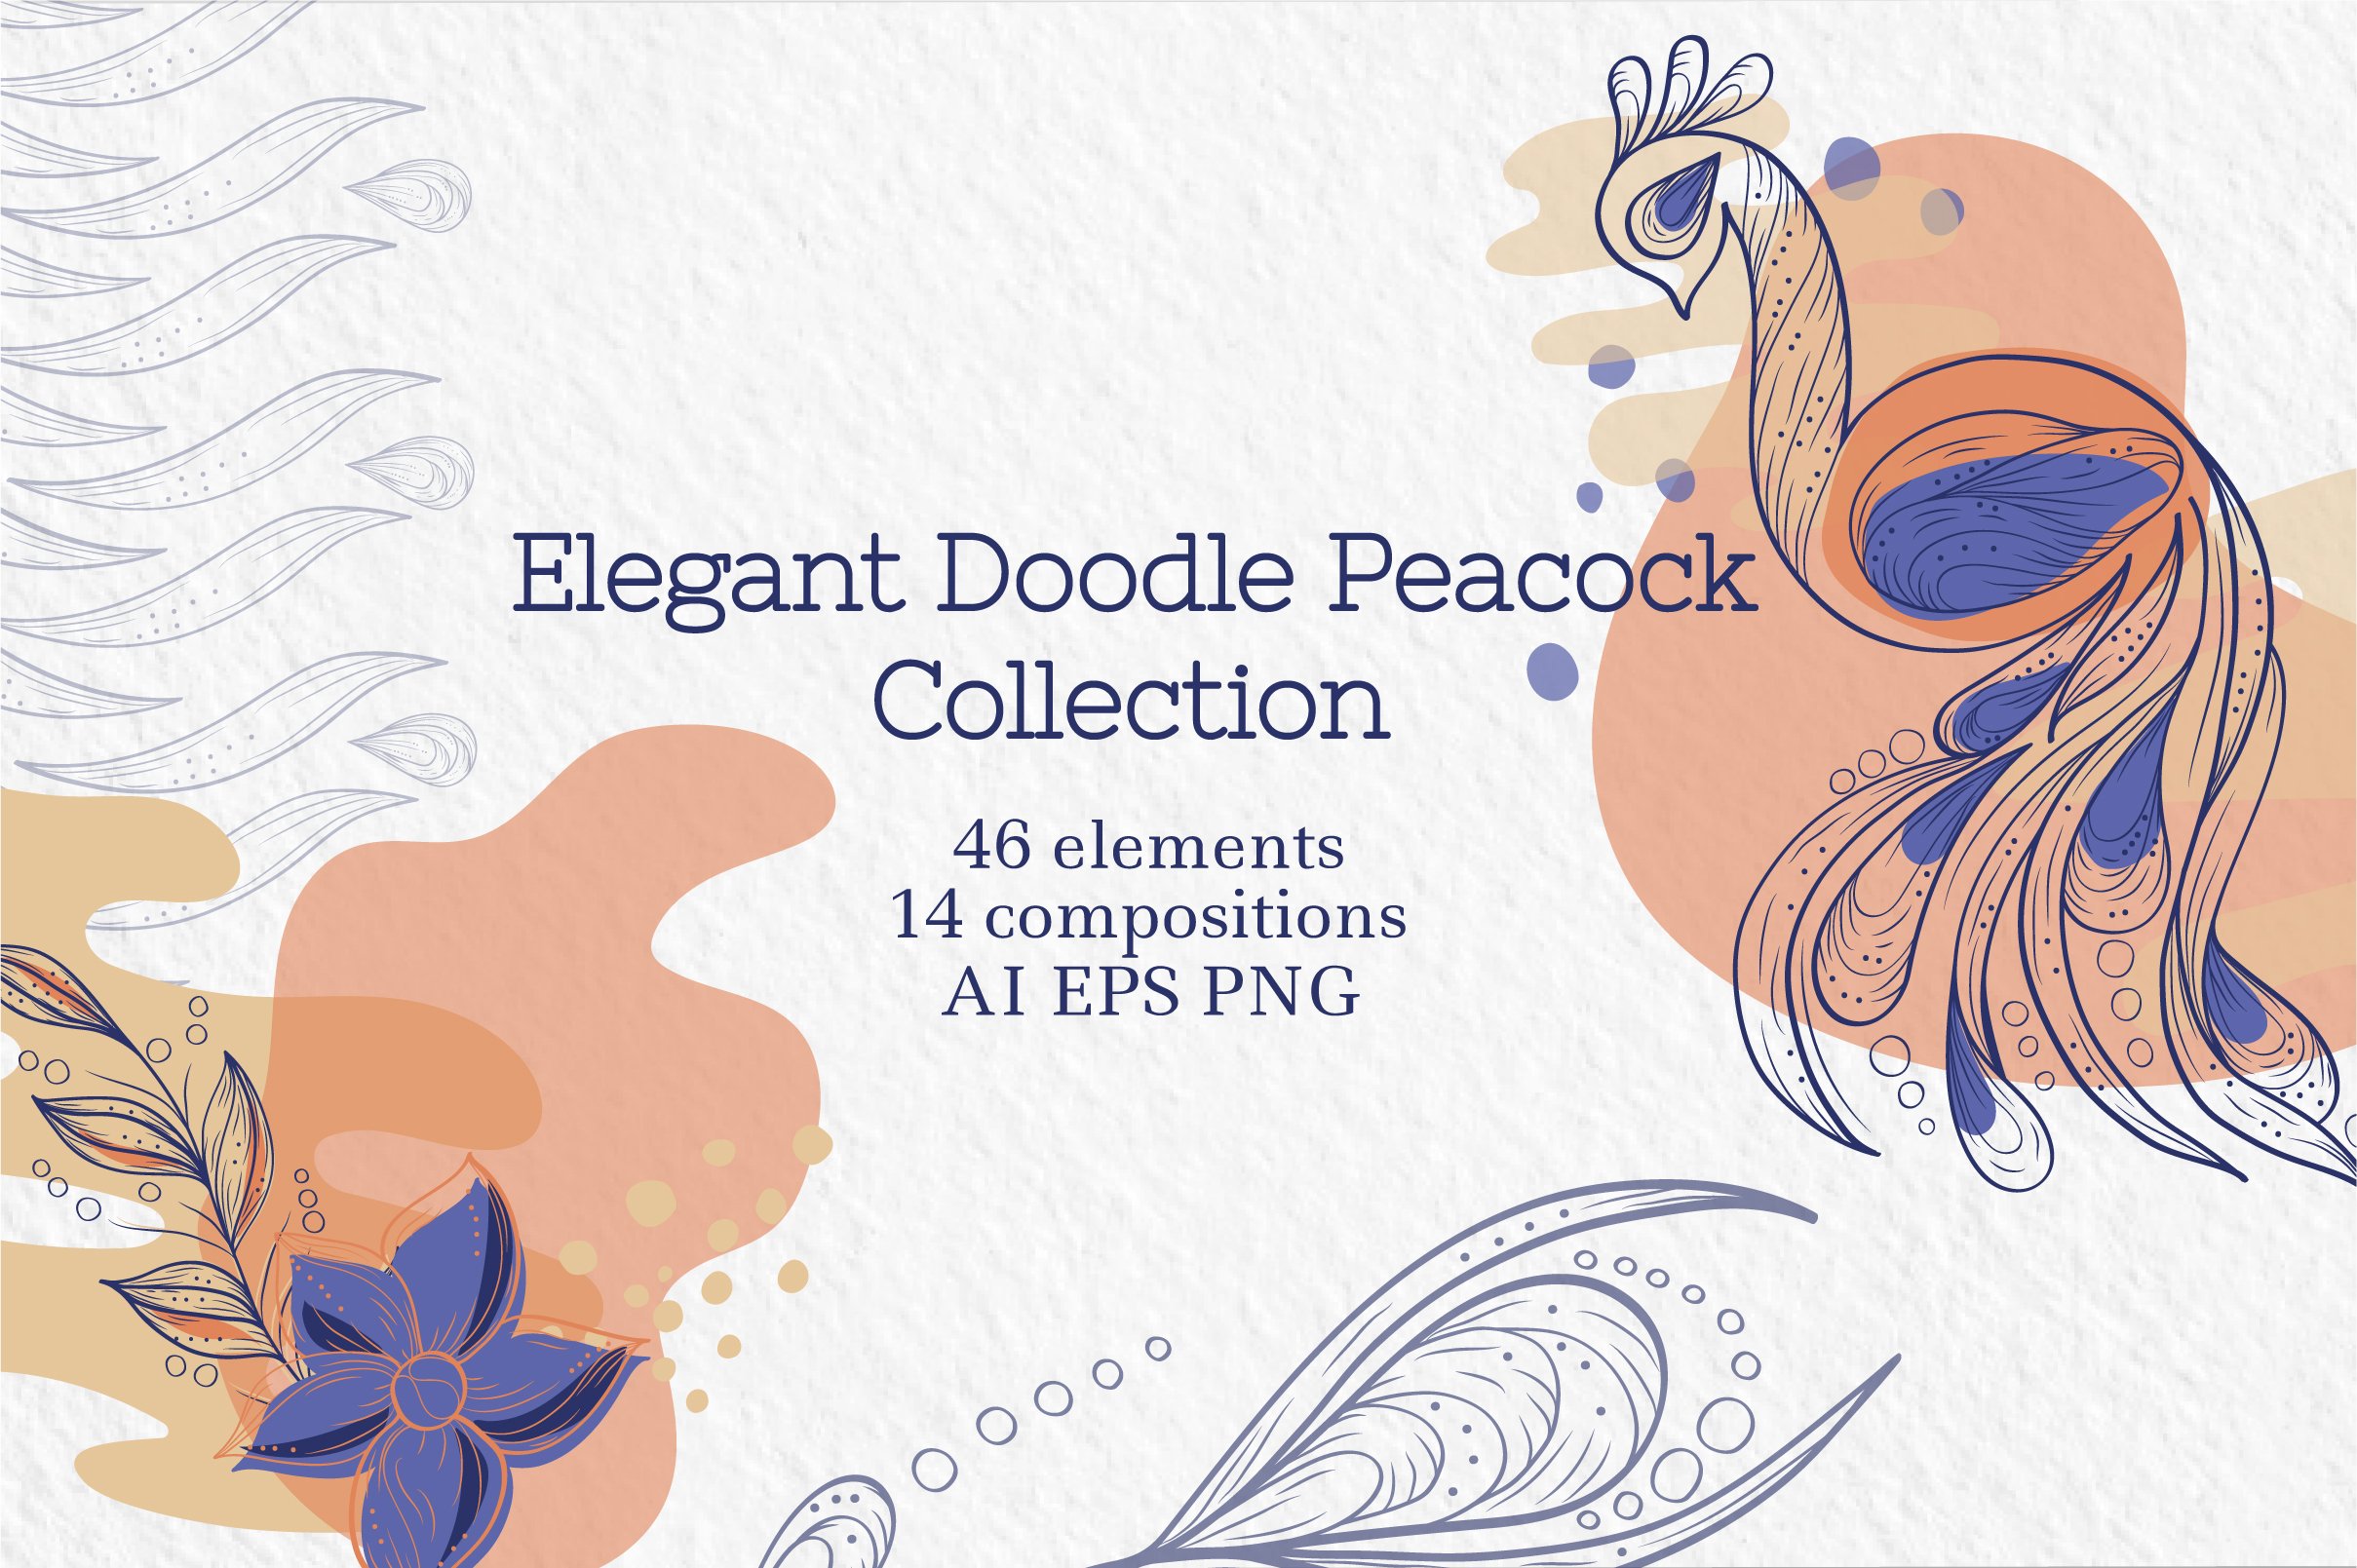 Elegant Doodle Peacock Collection cover image.